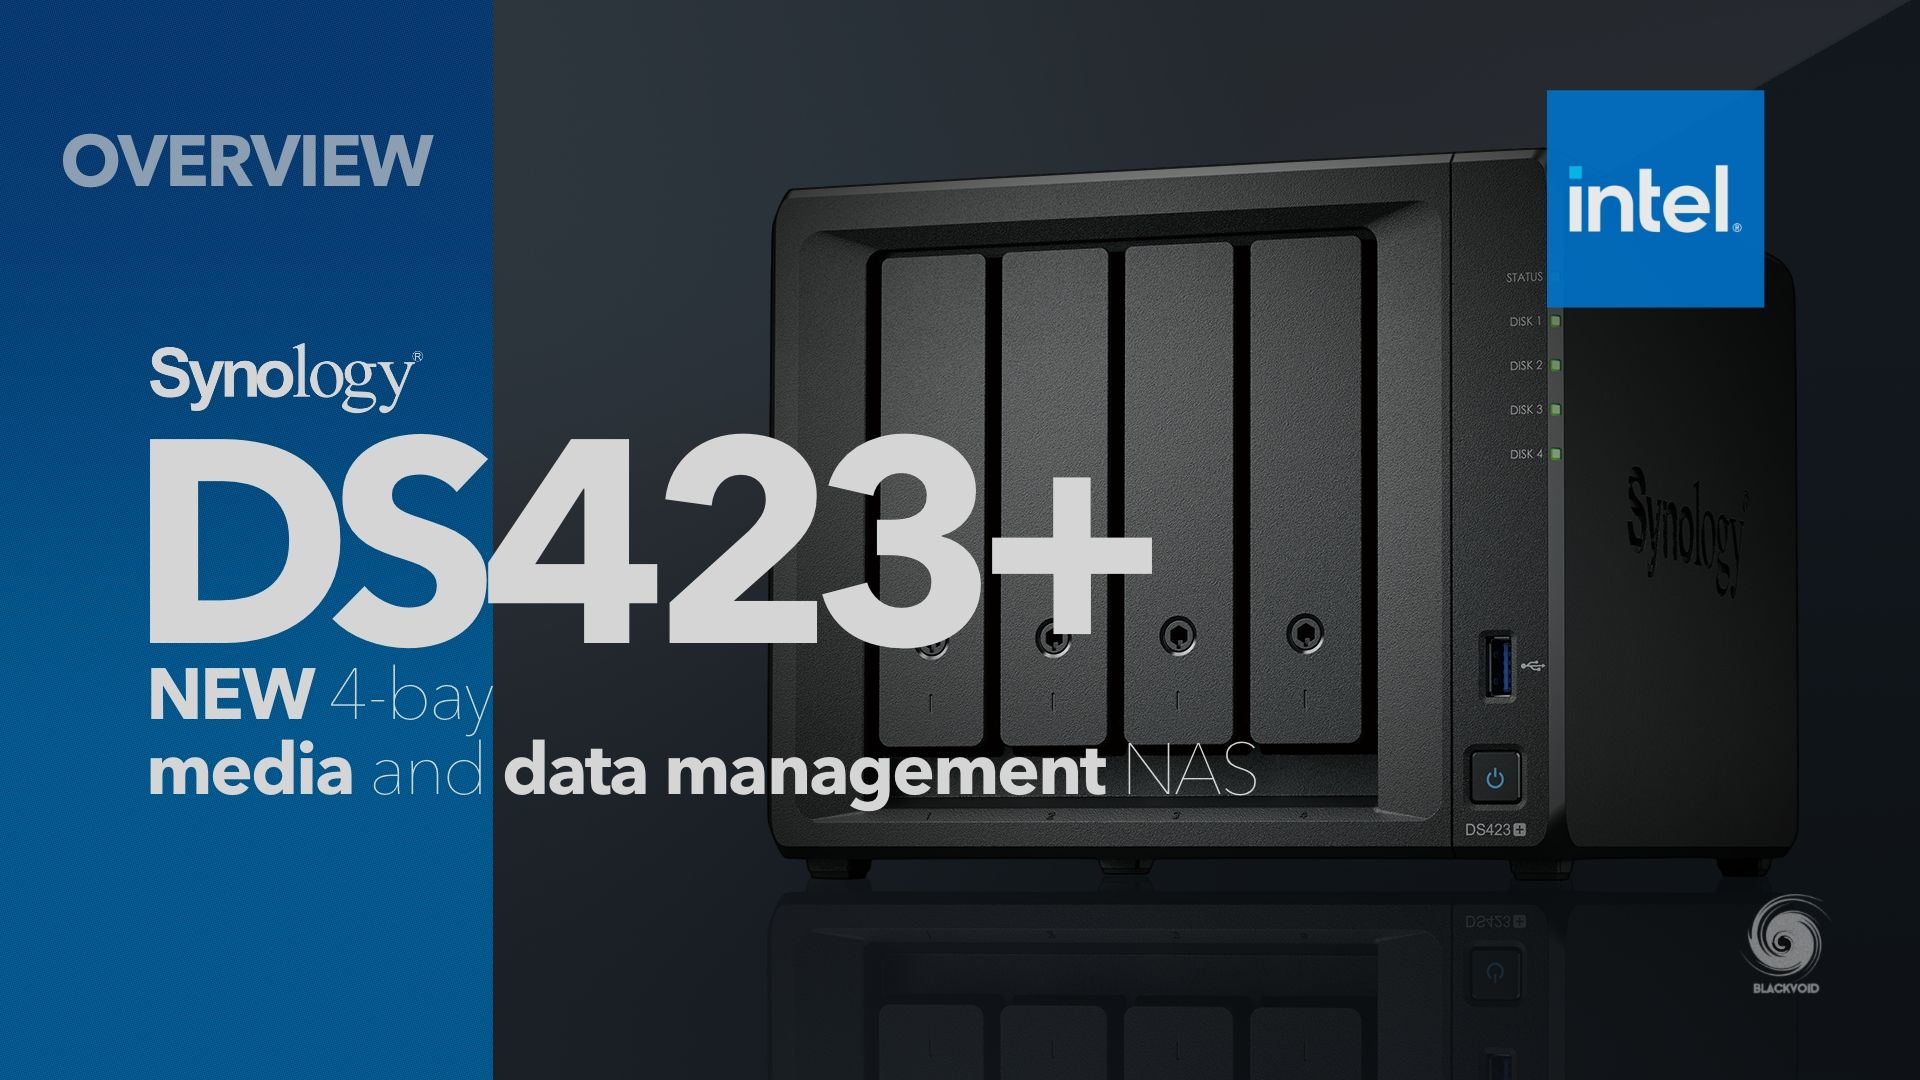 Synology DS423 released (4-bay value series NAS) – NAS Compares